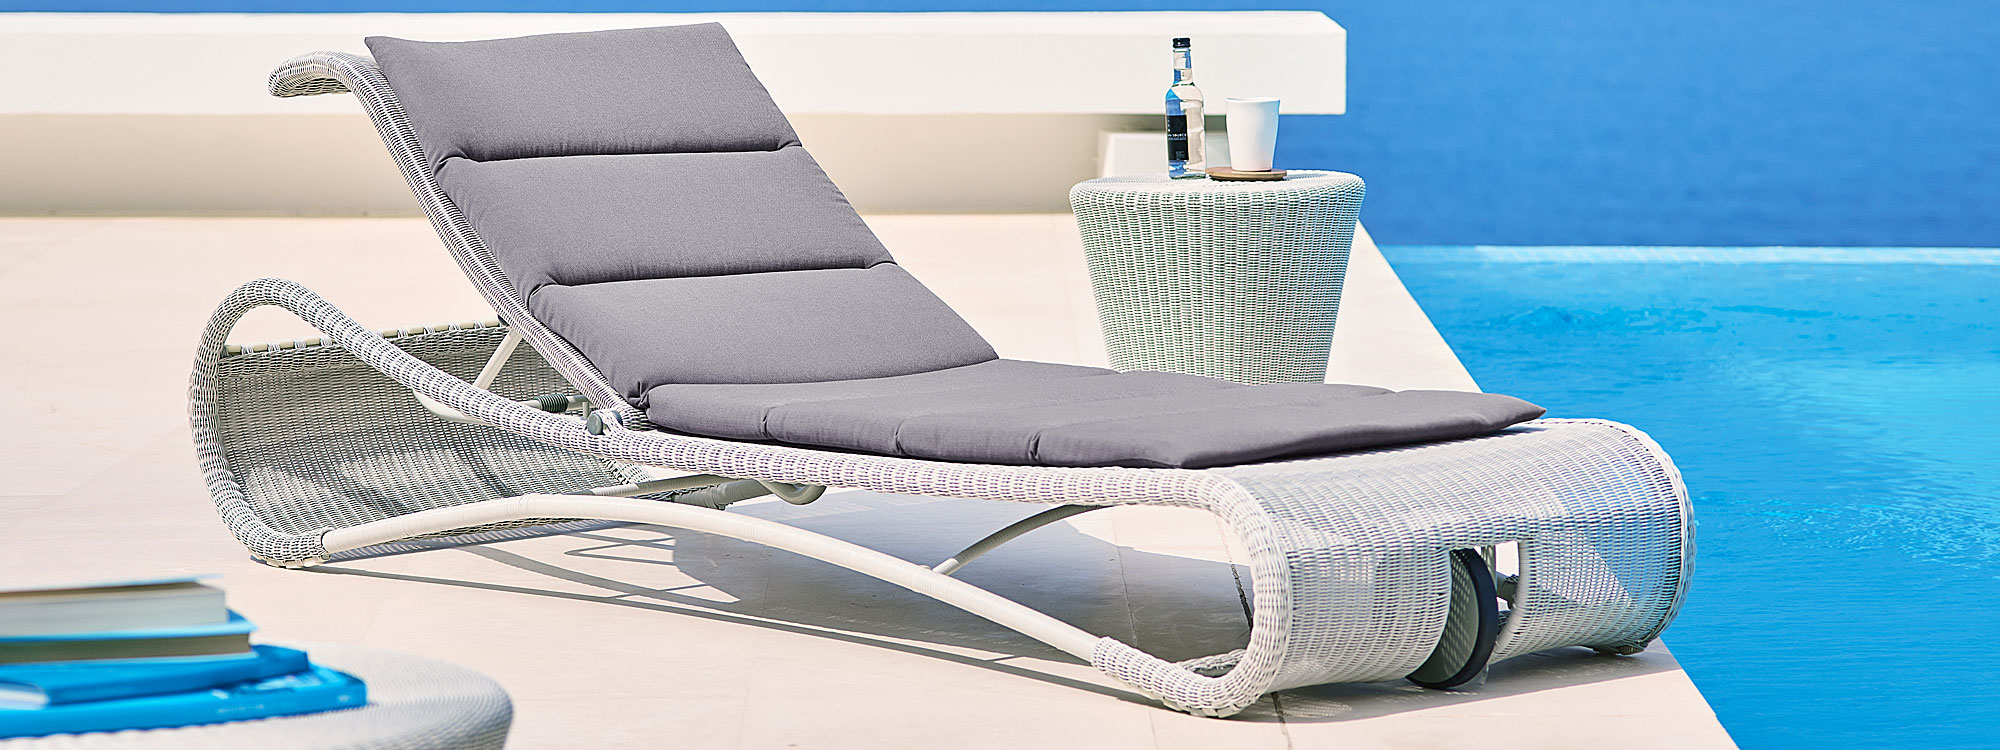 Escape all-weather rattan sun lounger is a modern sun bed made in luxury garden furniture materials by Cane-line rattan garden furniture co.